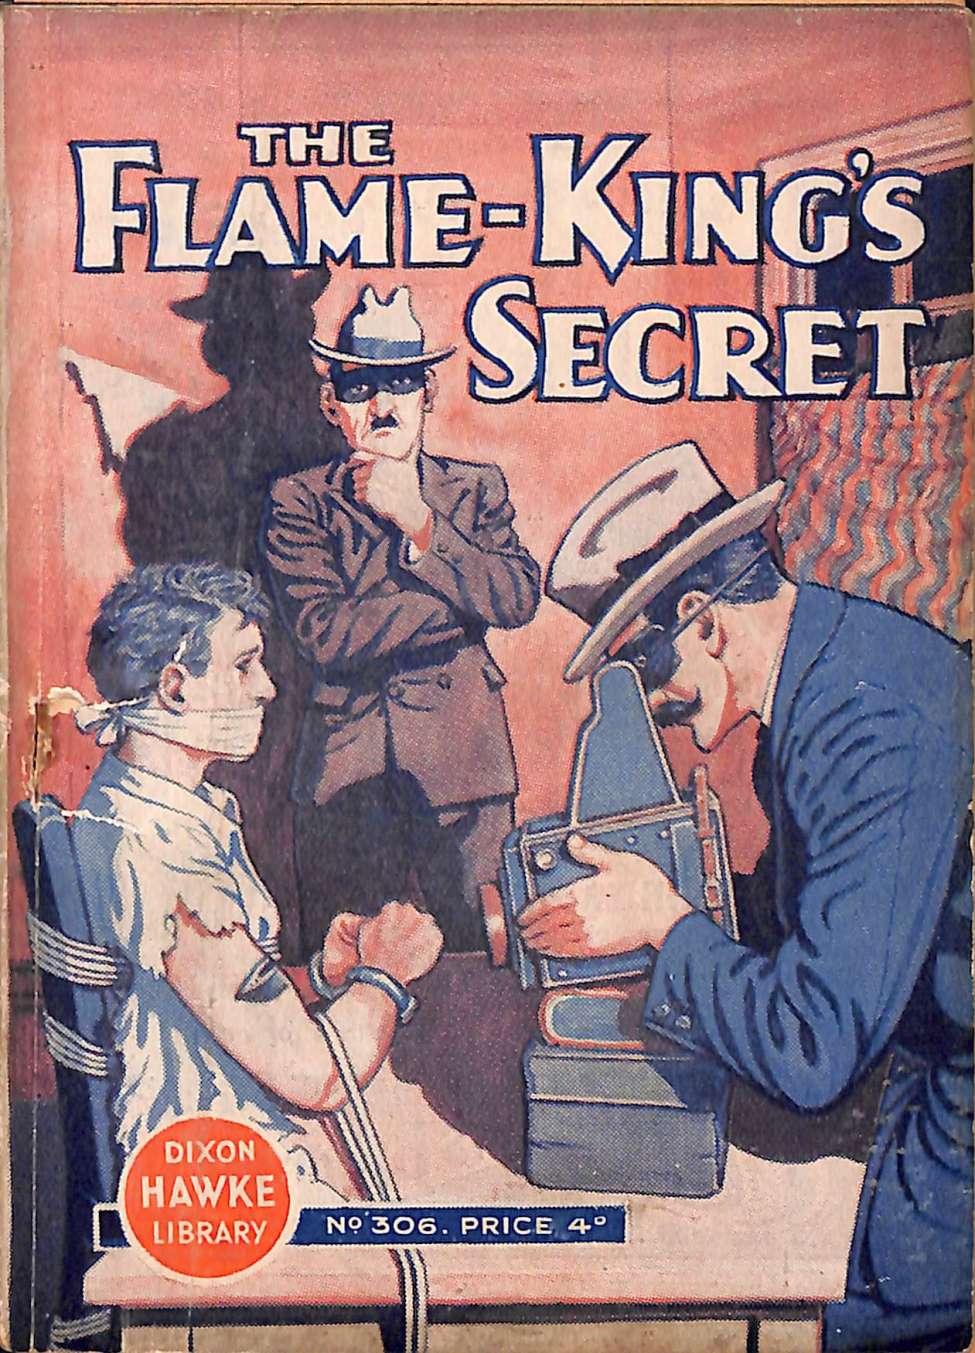 Book Cover For Dixon Hawke Library 306 - The Flame-King's Secret